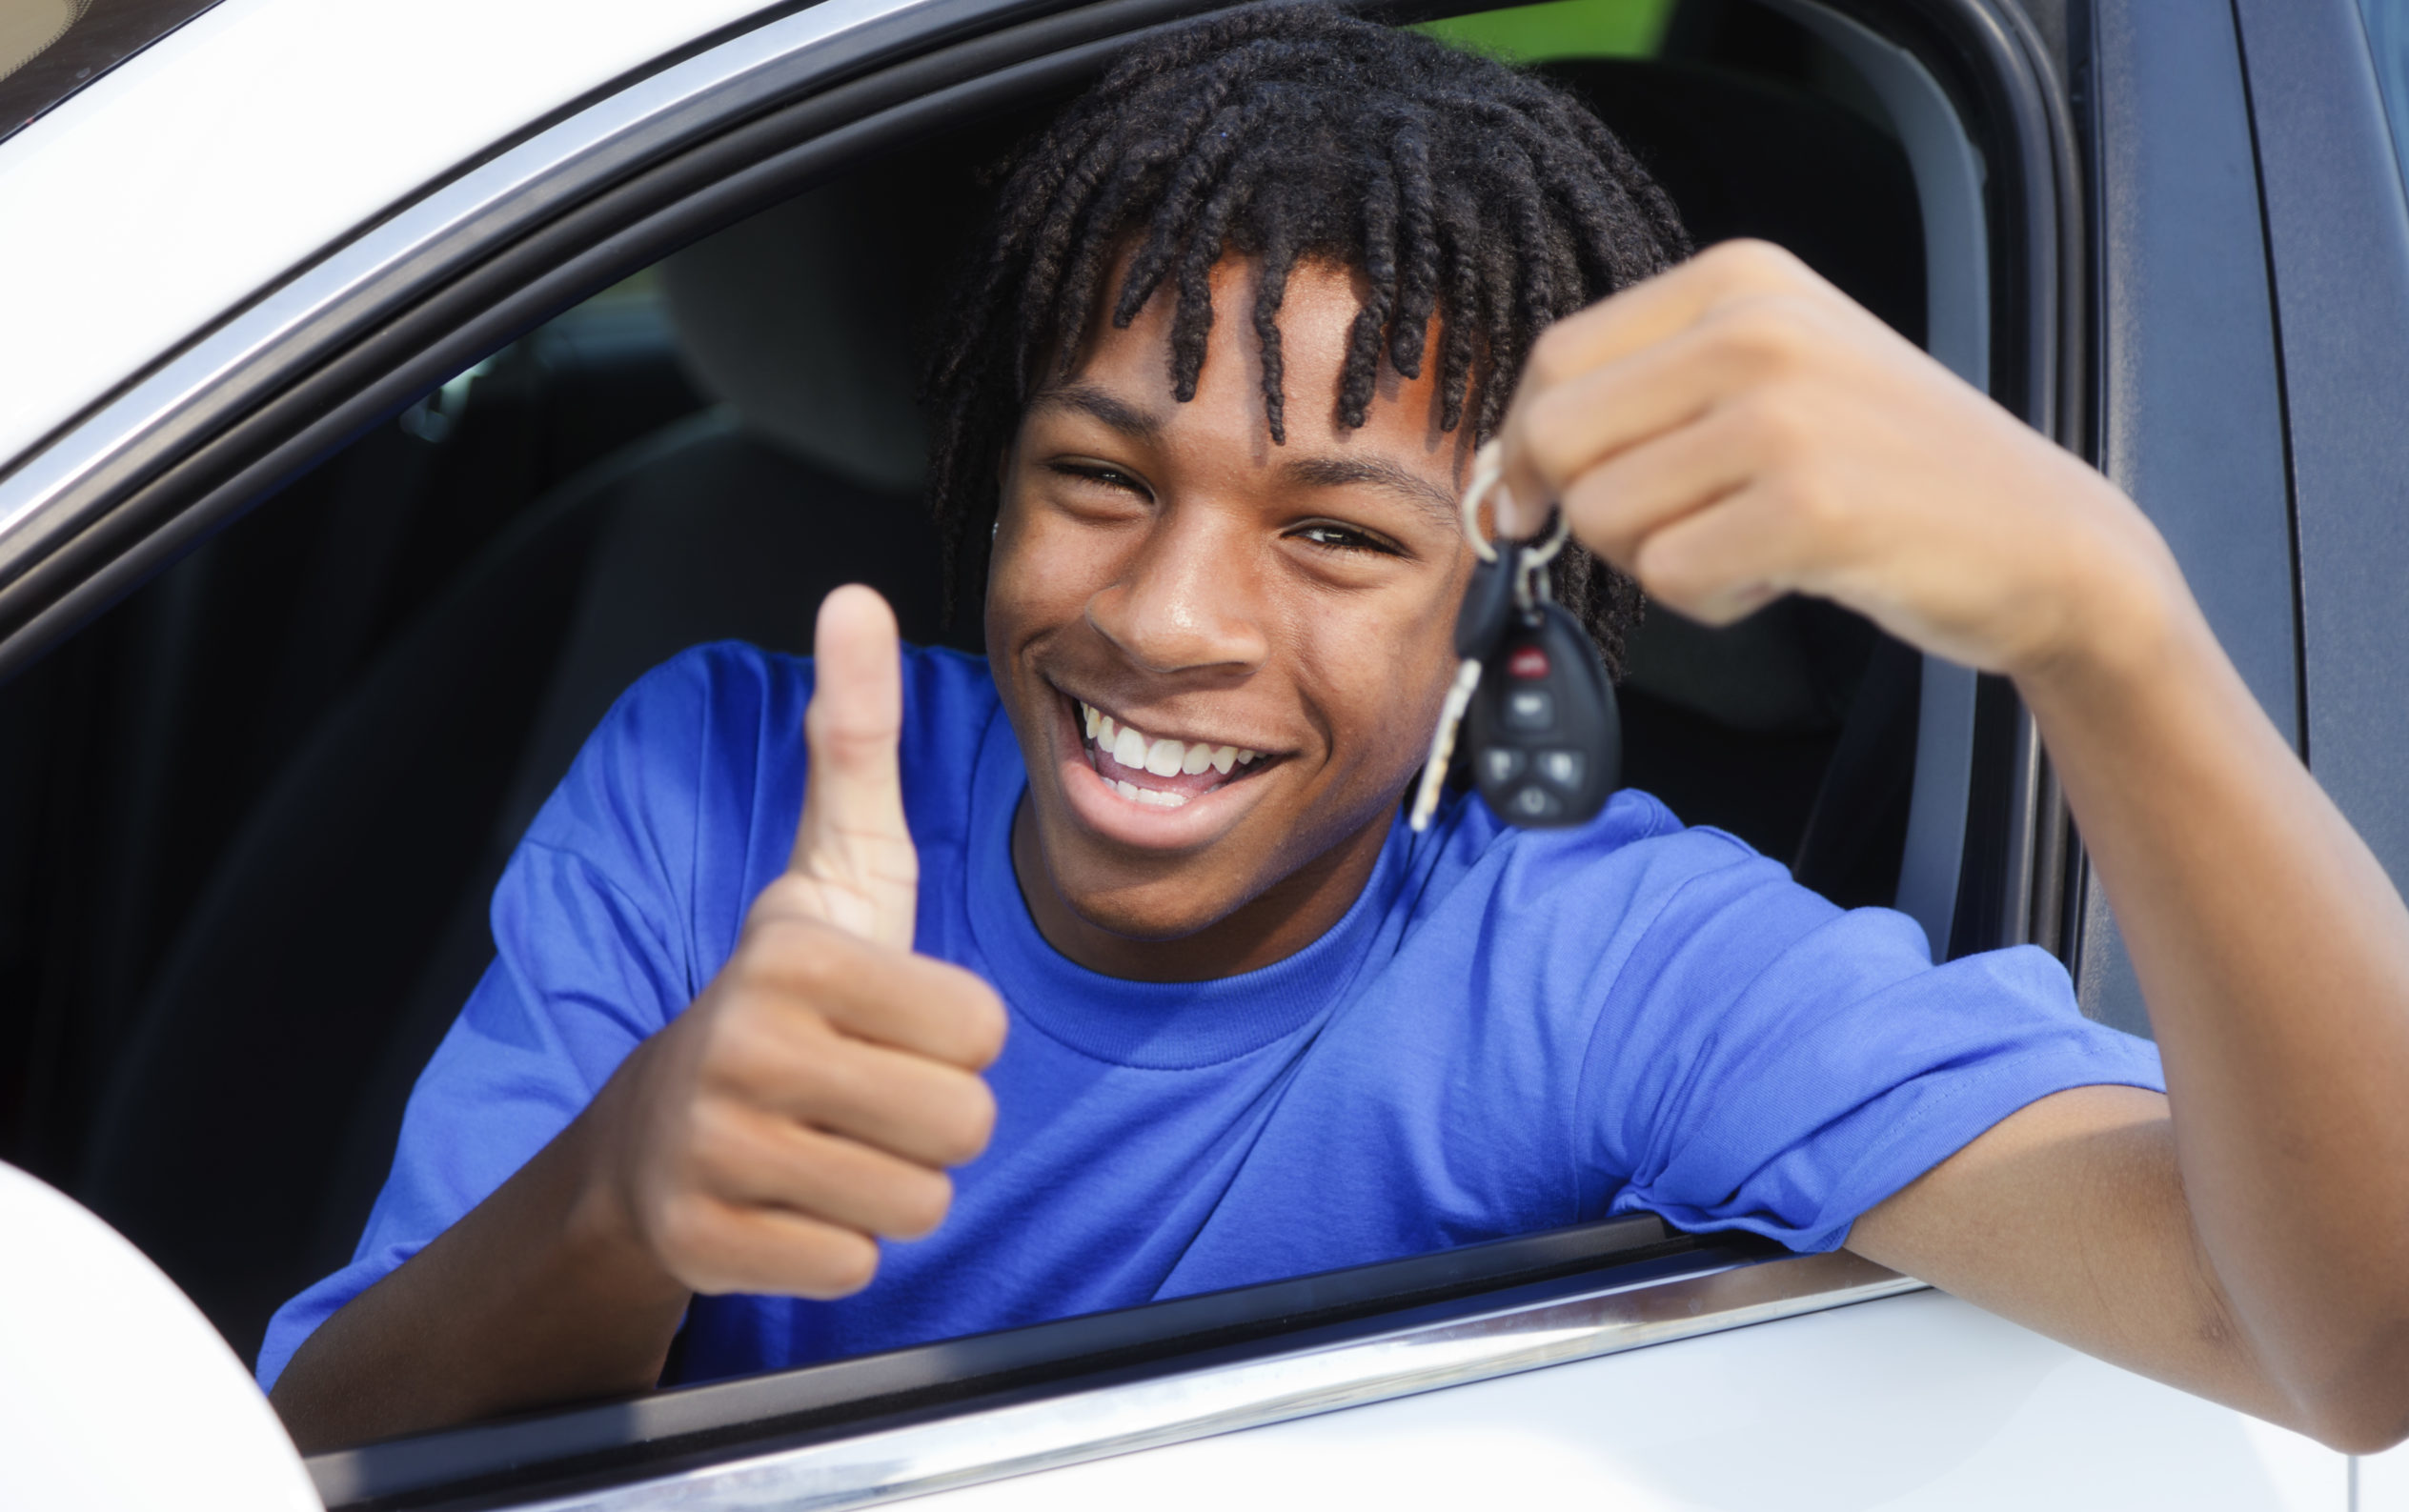 A teenage boy celebrating that he passed his driver's test.